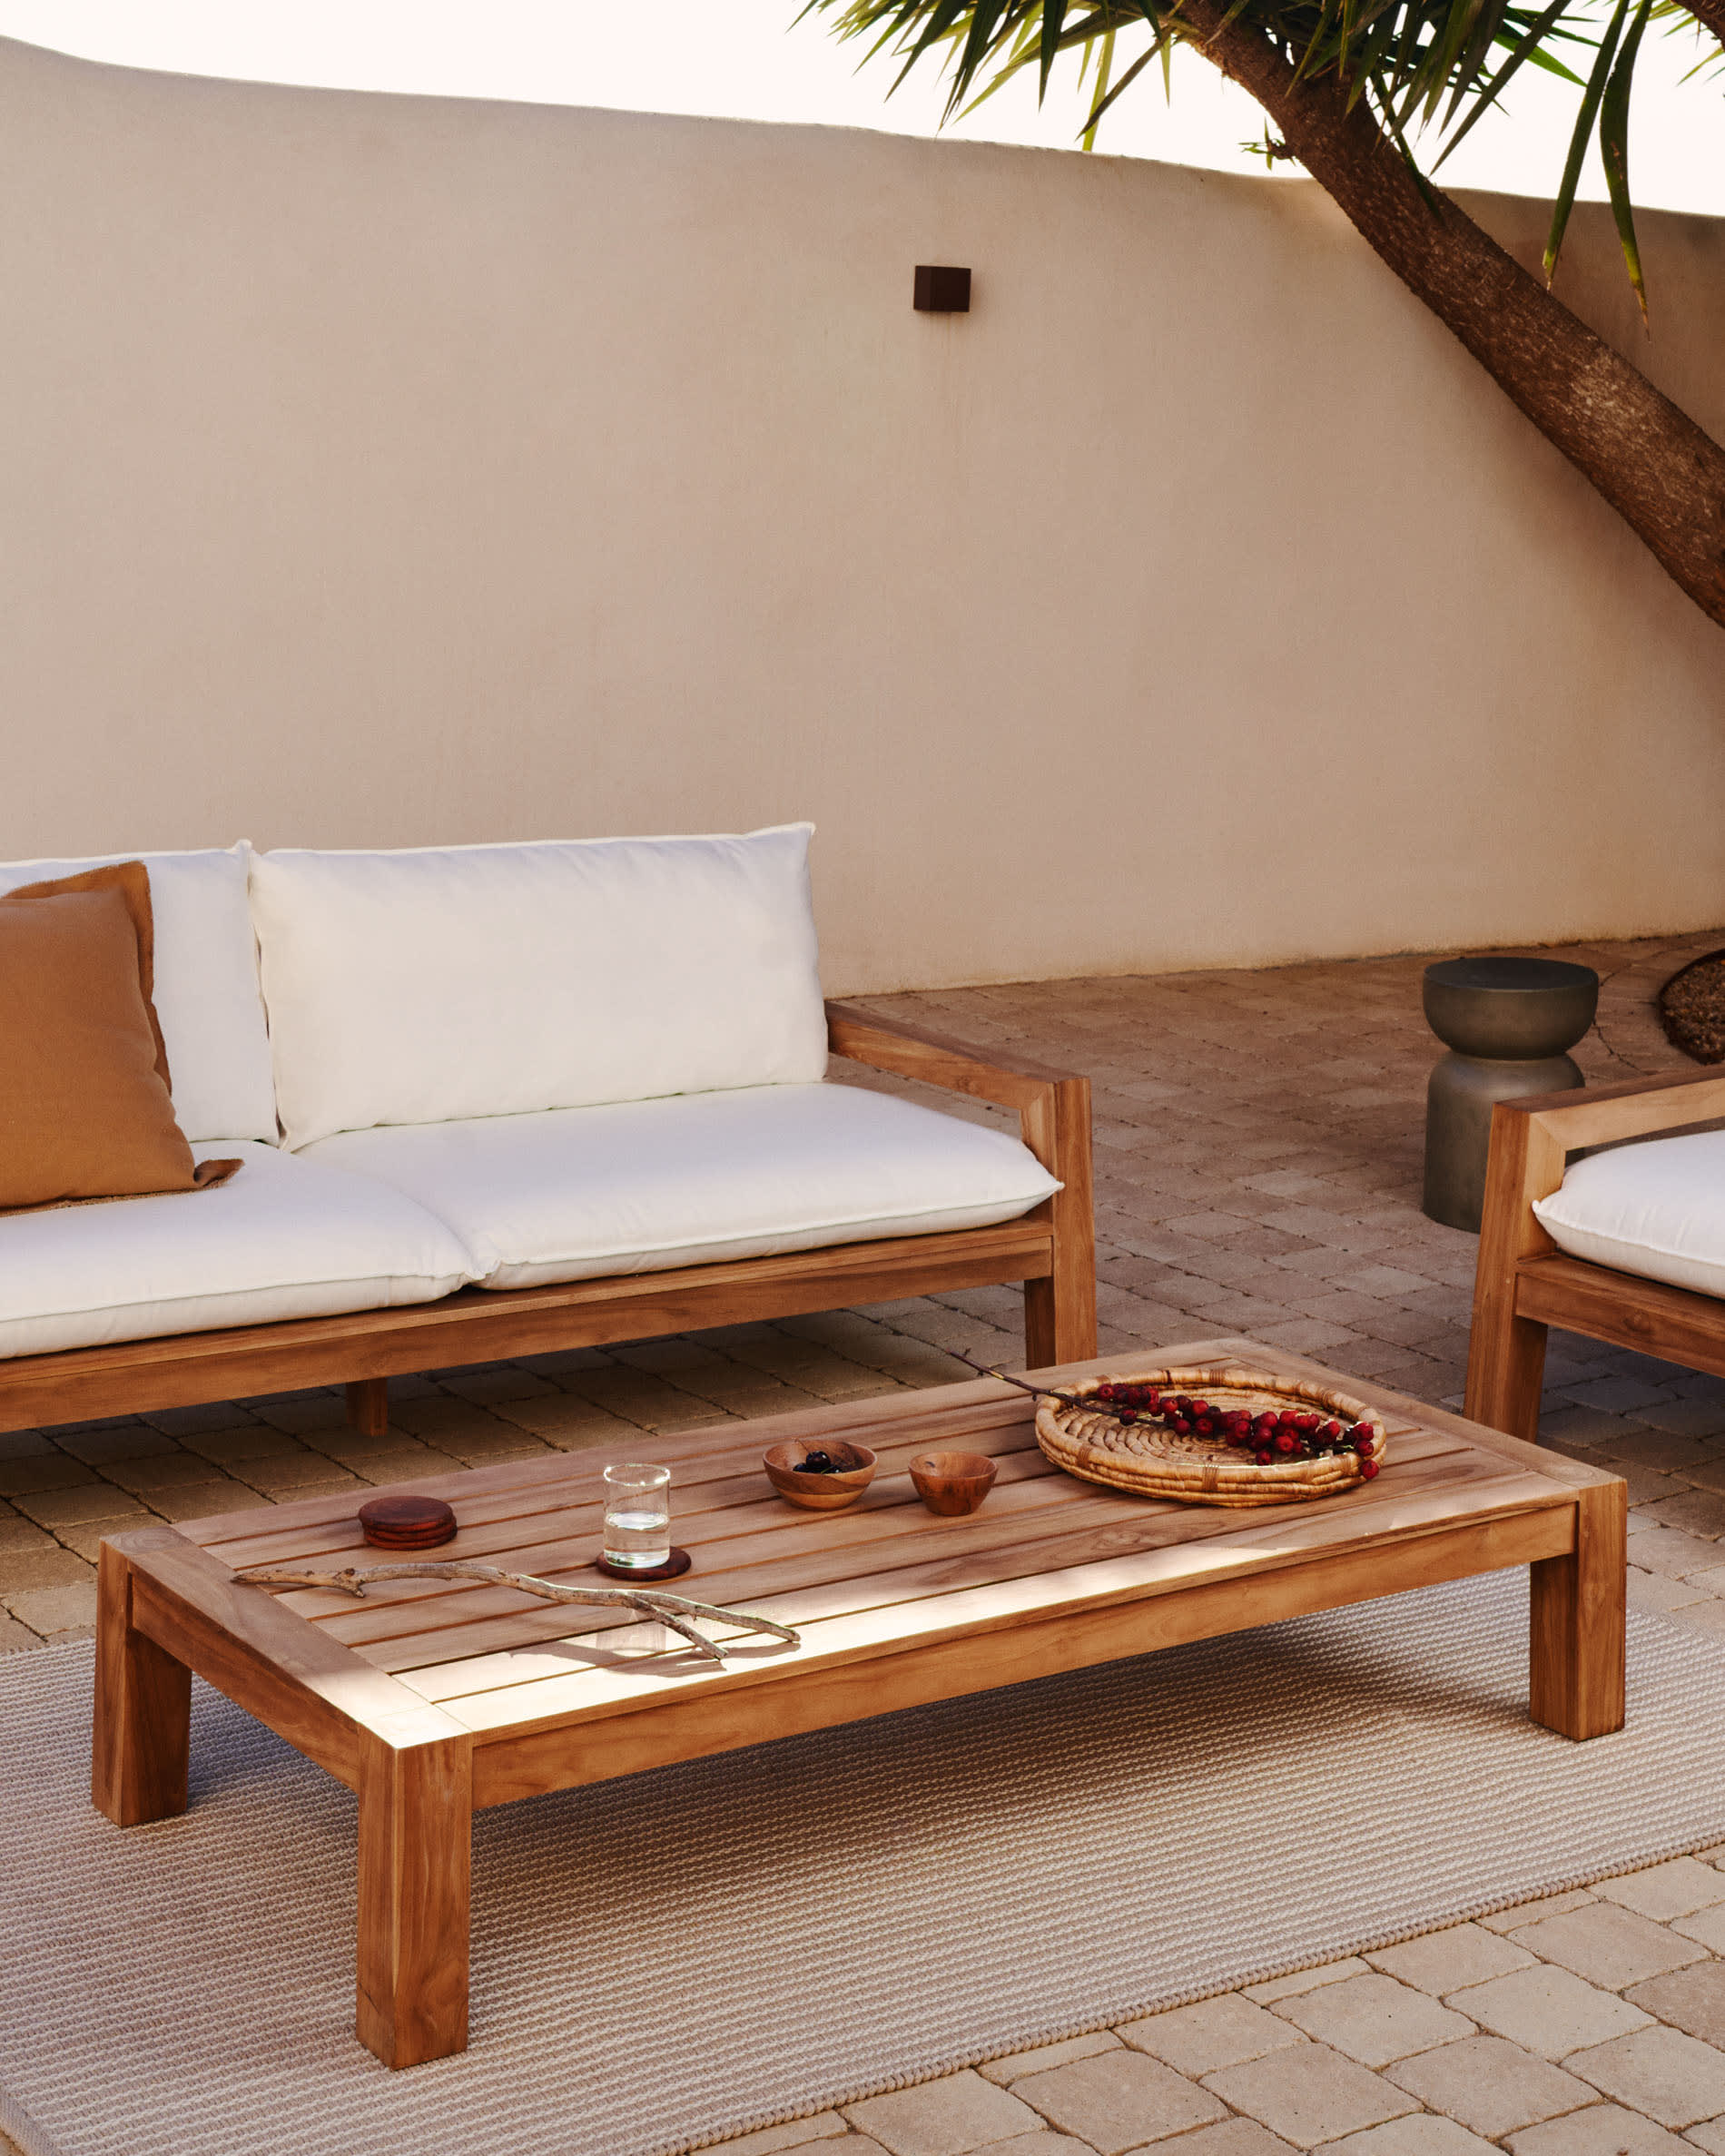 Forcanera coffee table in solid teak, 150 x 71 cm